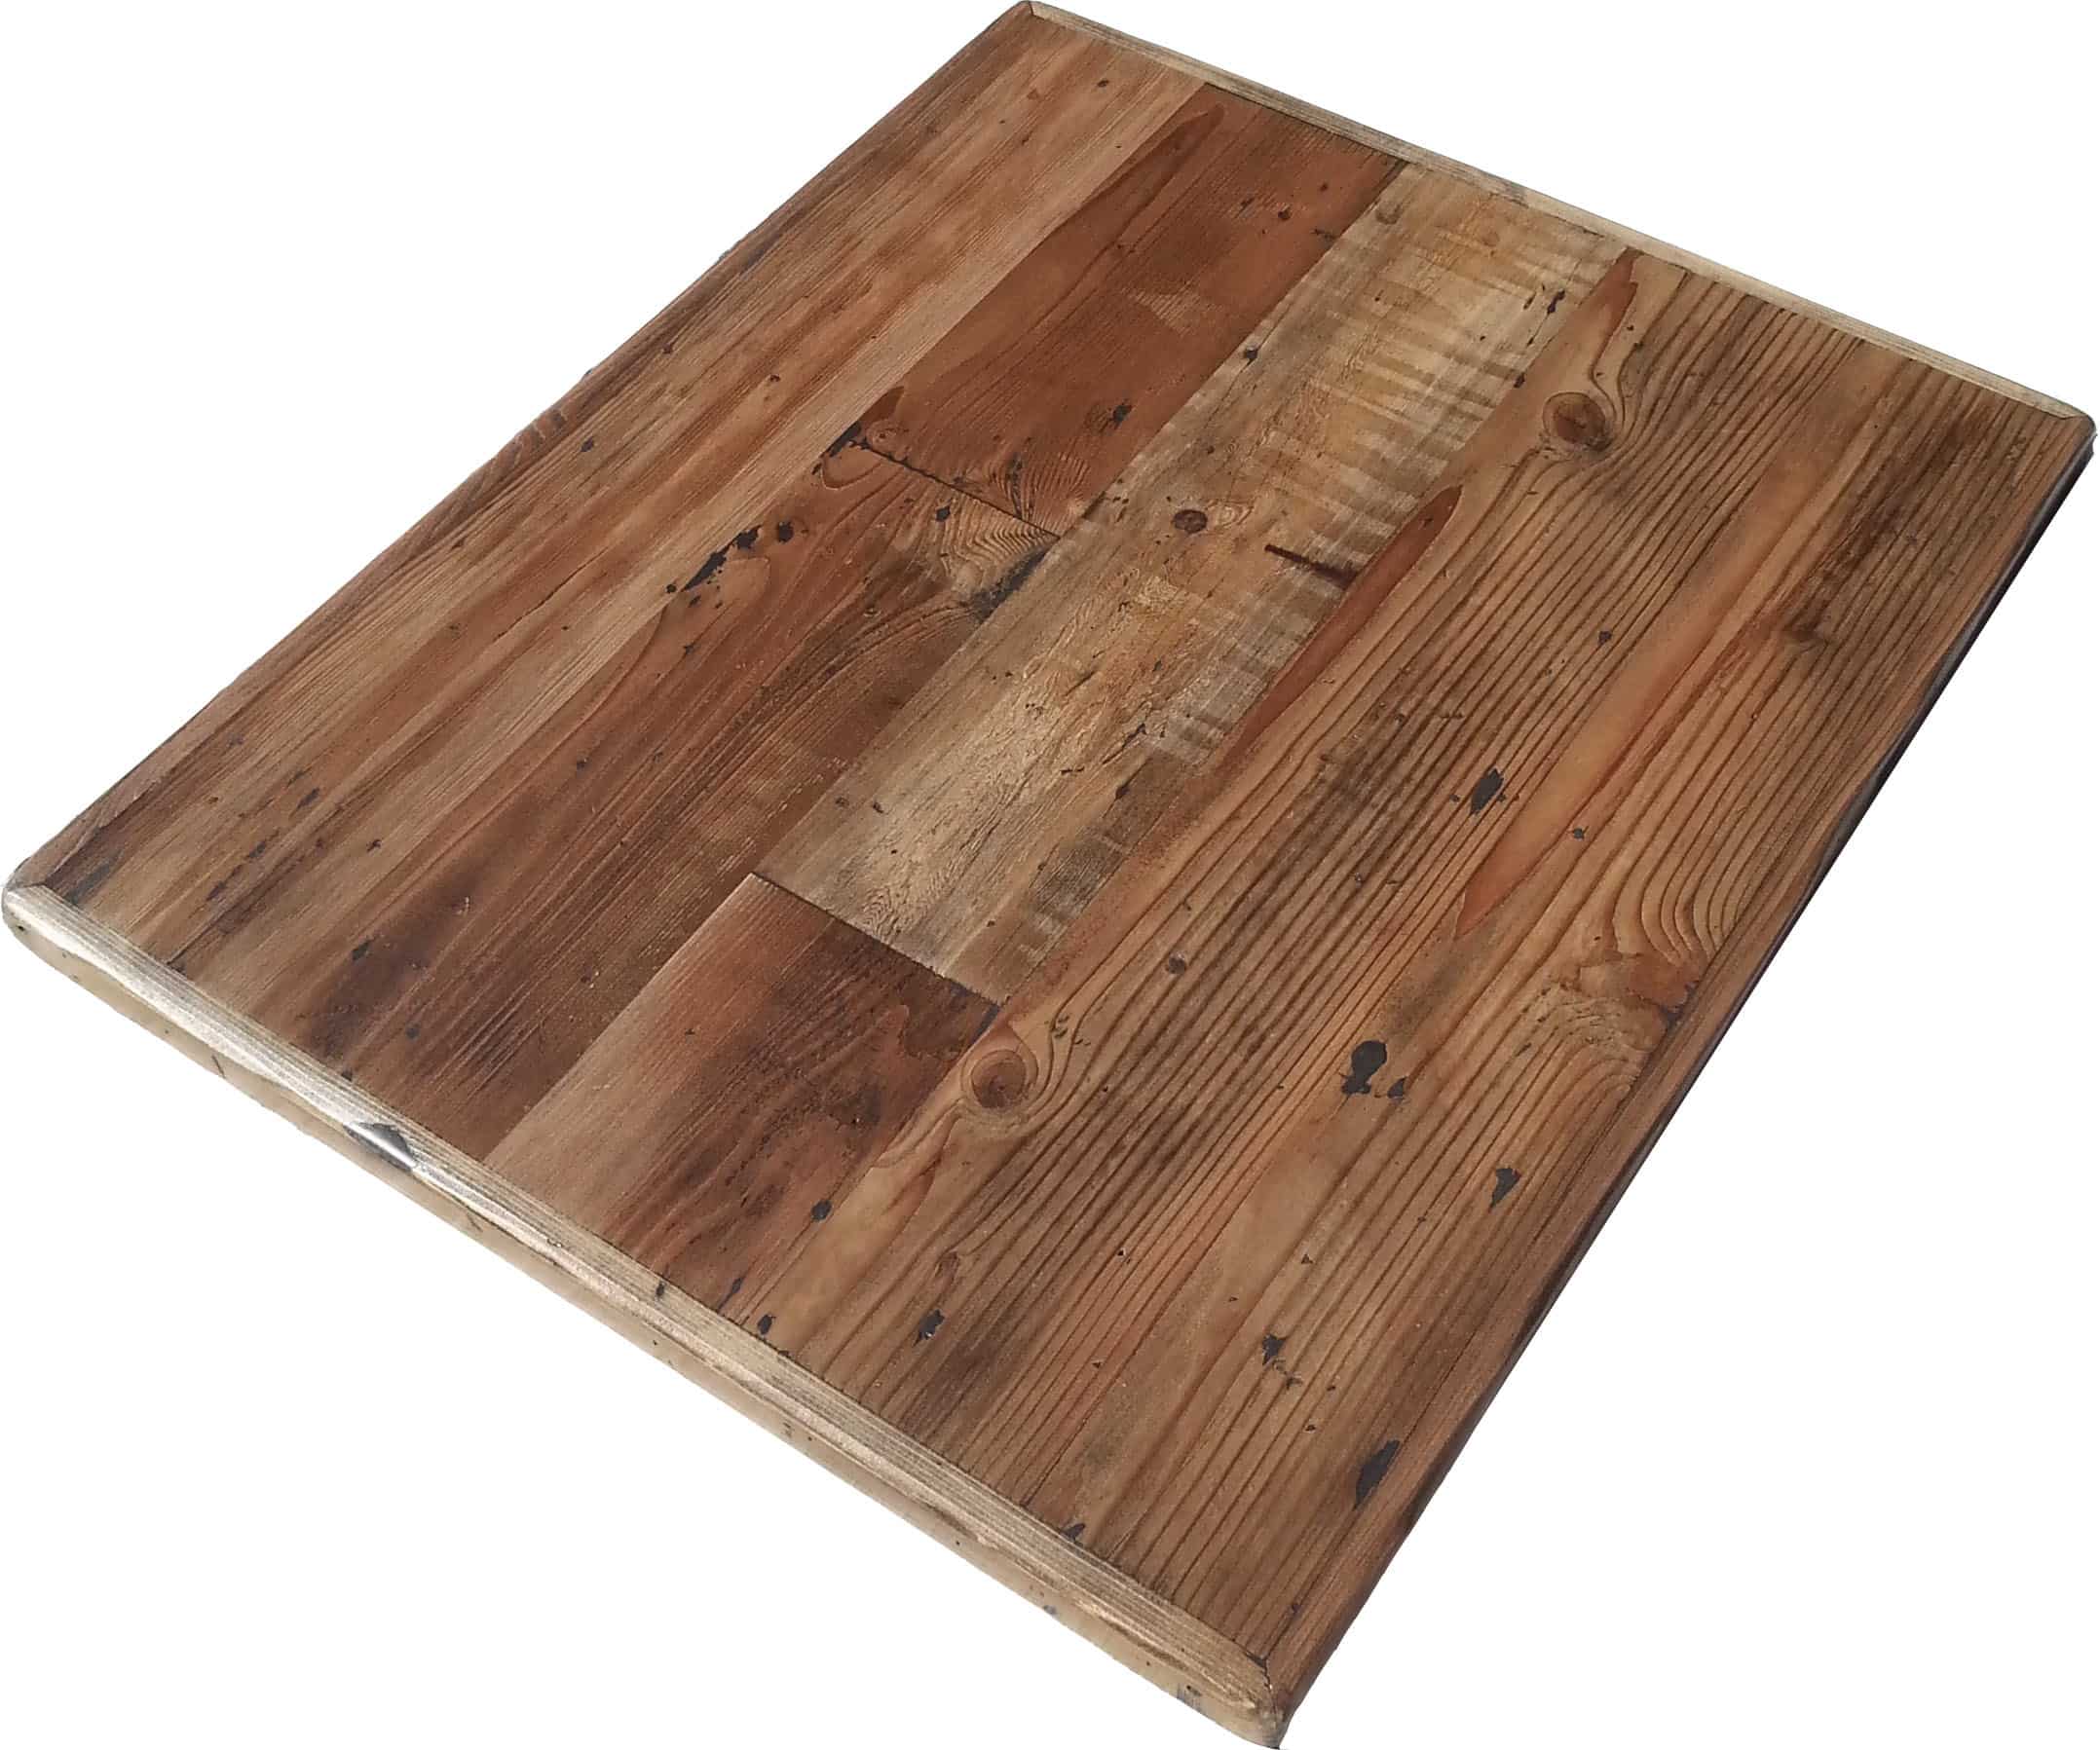 Woodworking table cover Main Image